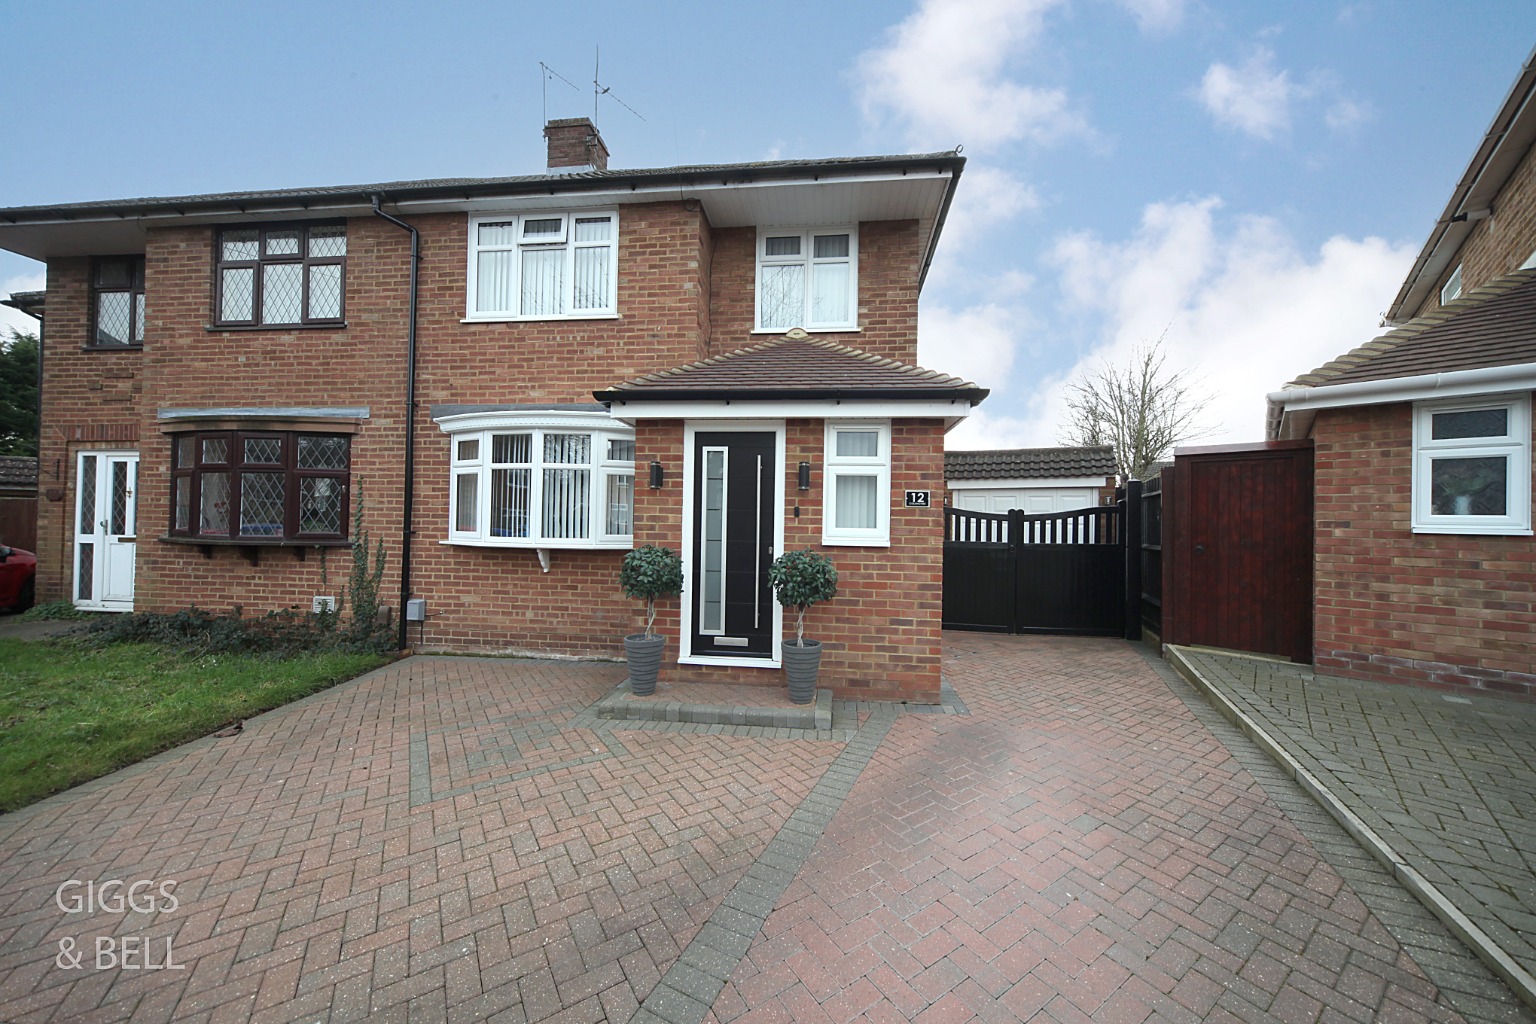 3 bed semi-detached house for sale in Collingtree, Luton, LU2 